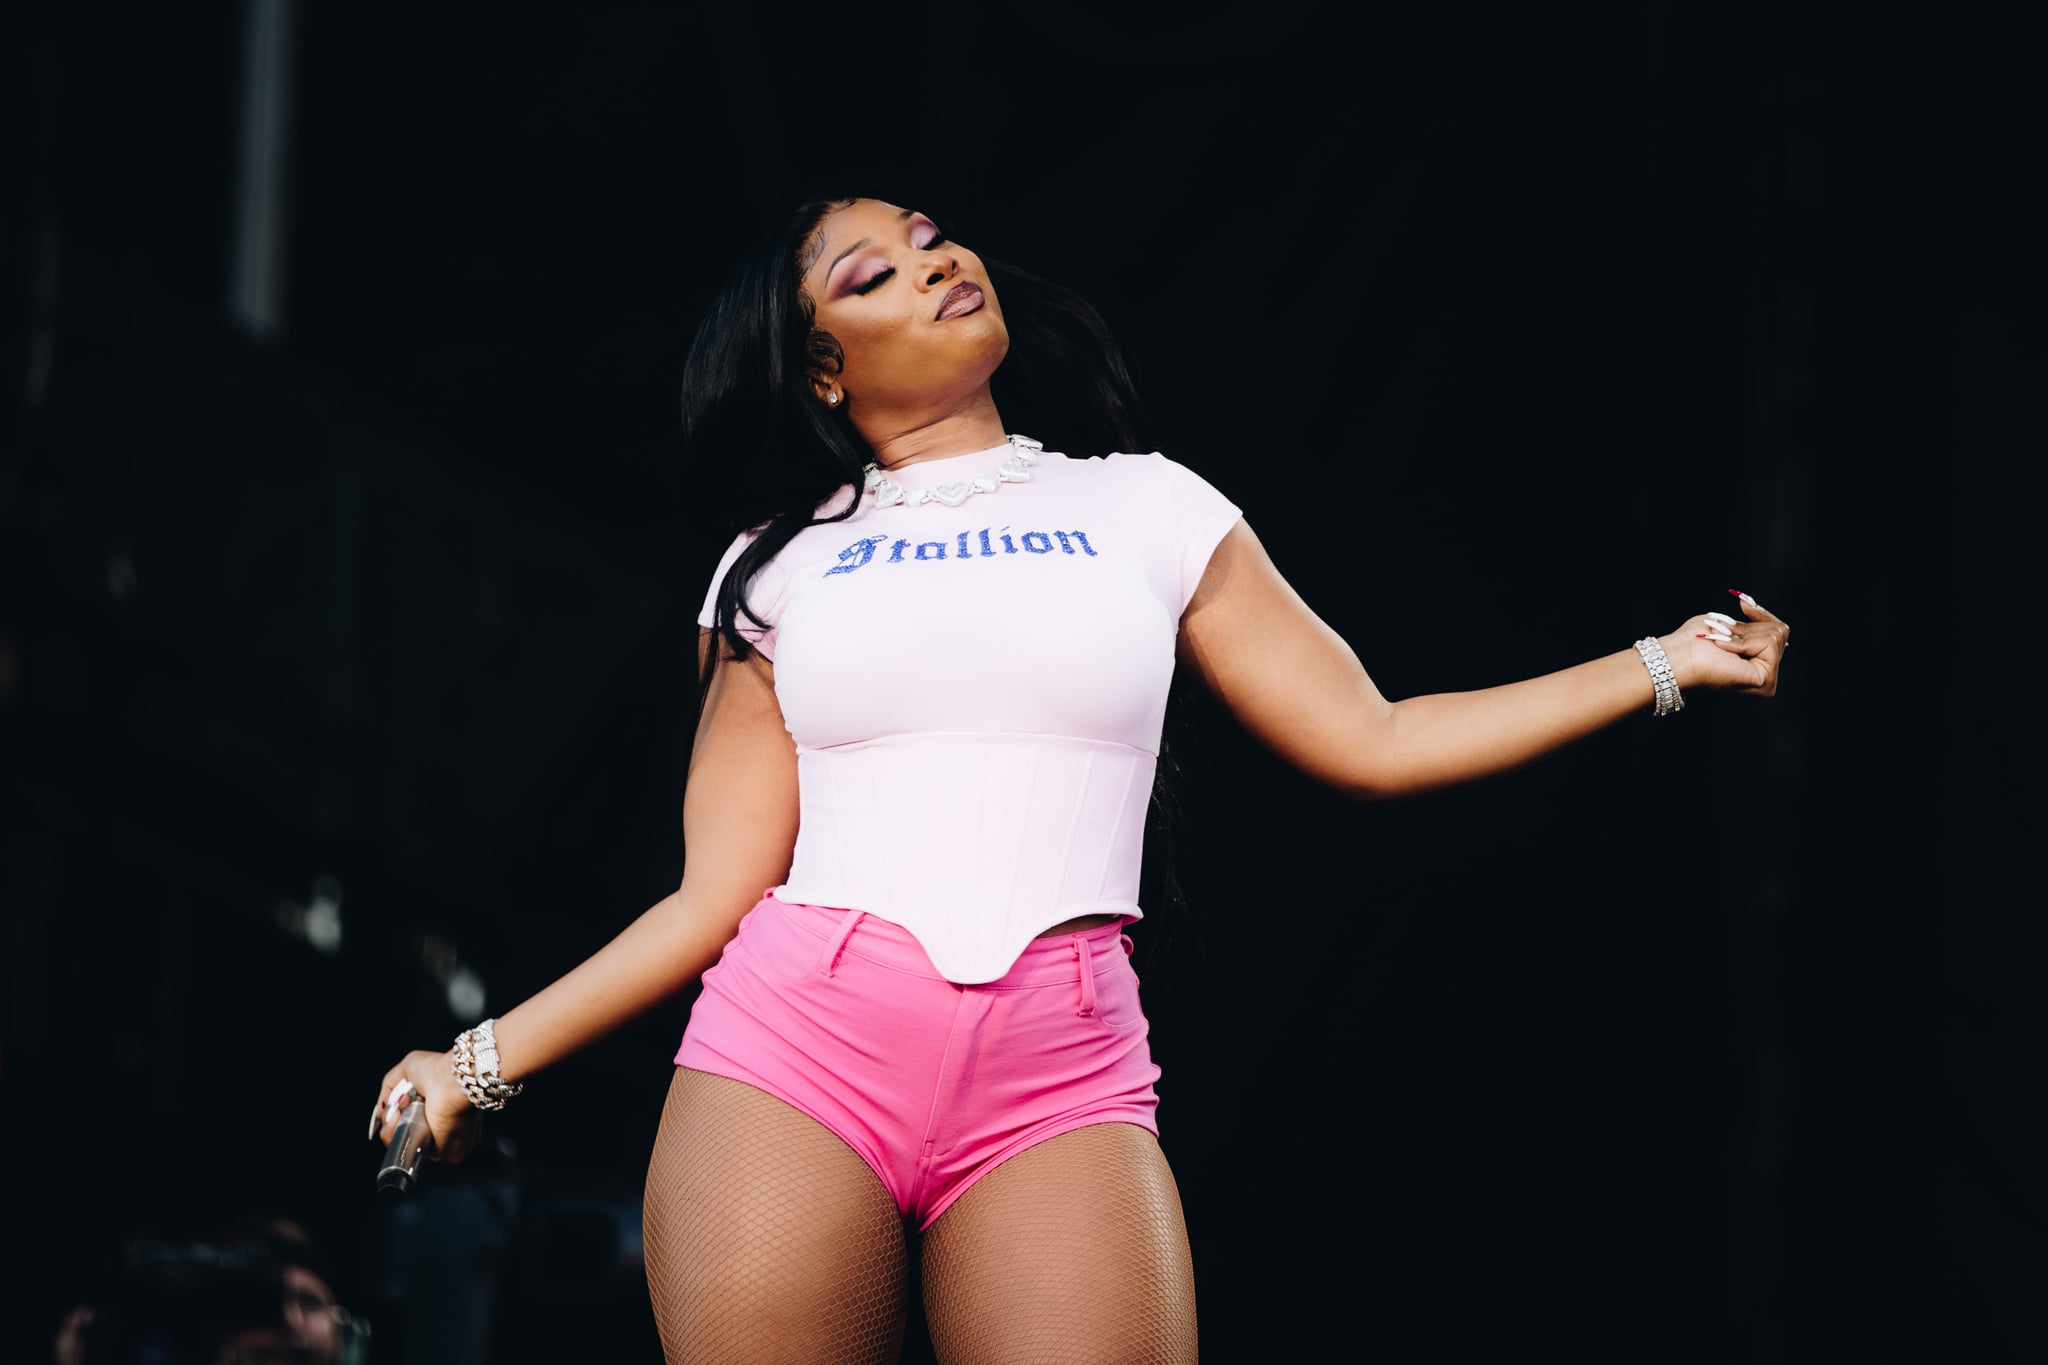 AUSTIN, TEXAS - OCTOBER 01: Megan Thee Stallion performs onstage during Austin City Limits Festival at Zilker Park on October 01, 2021 in Austin, Texas. (Photo by Rich Fury/Getty Images)